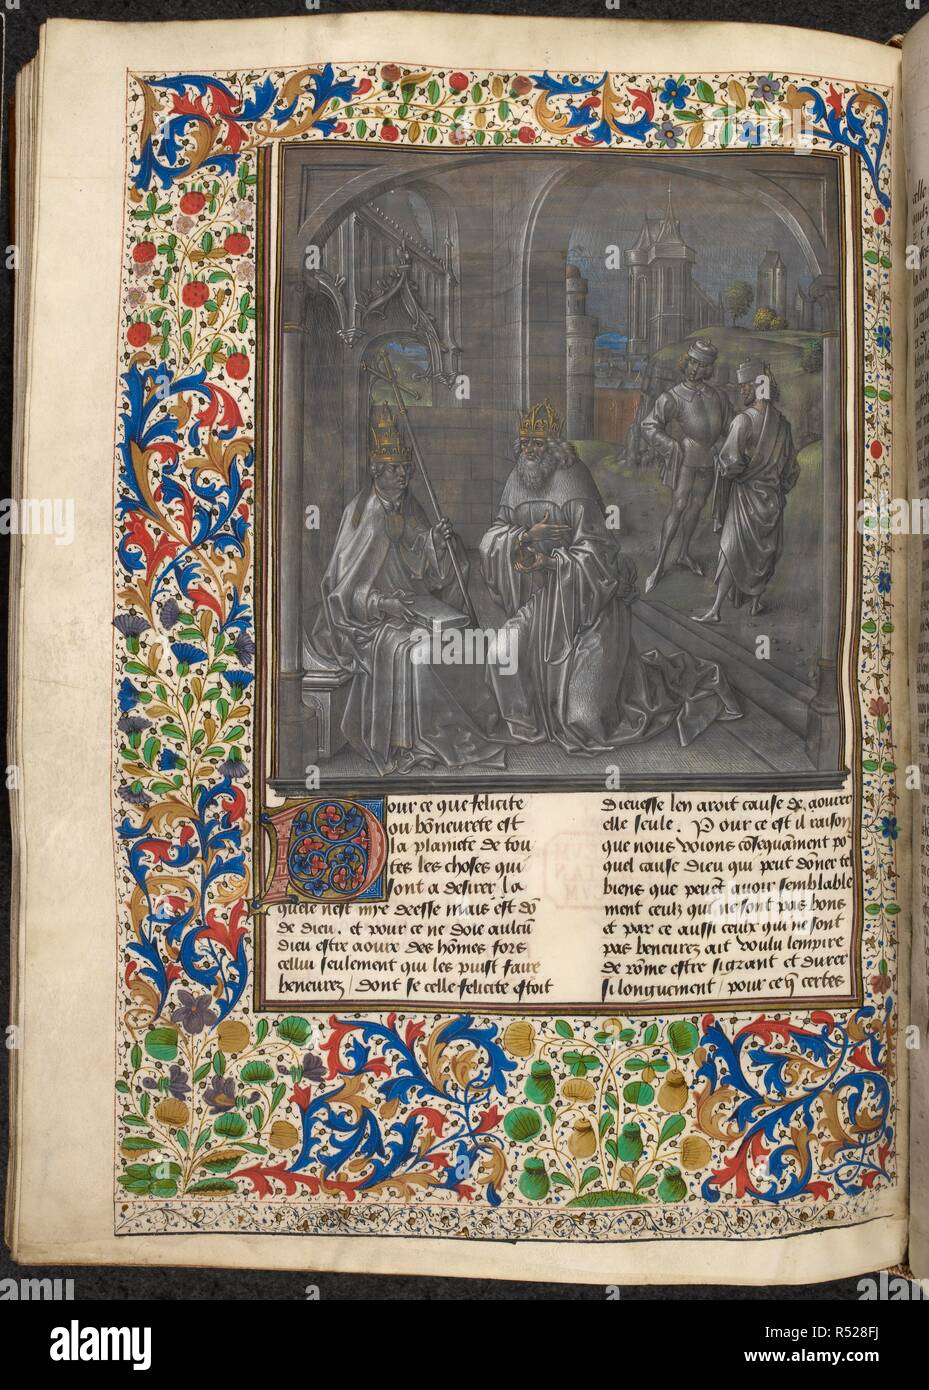 A pope and Christian emperor. S. AUGUSTINE, De civitate Dei, in French: the translation and commentary made by Raoul de Presles for Charles V of France. Late 15th century. Source: Royal 14 D. I f.224v. Language: French. Author: de Presles, Raoul (Translator). Stock Photo